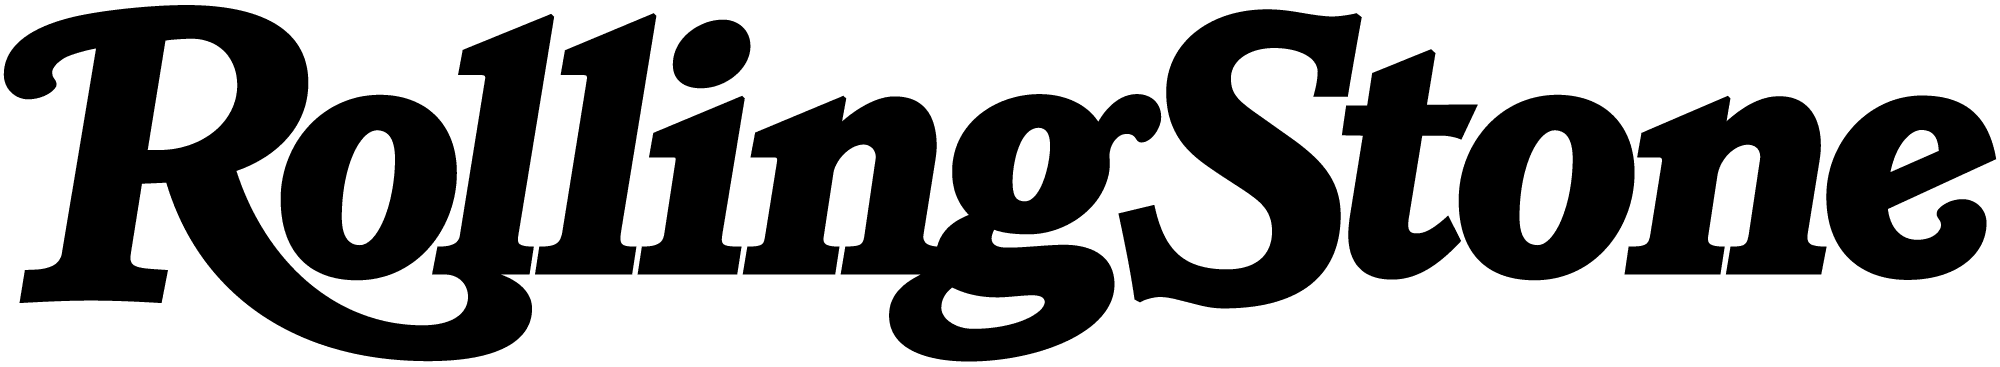 Rolling-Stone-logo-2018.png